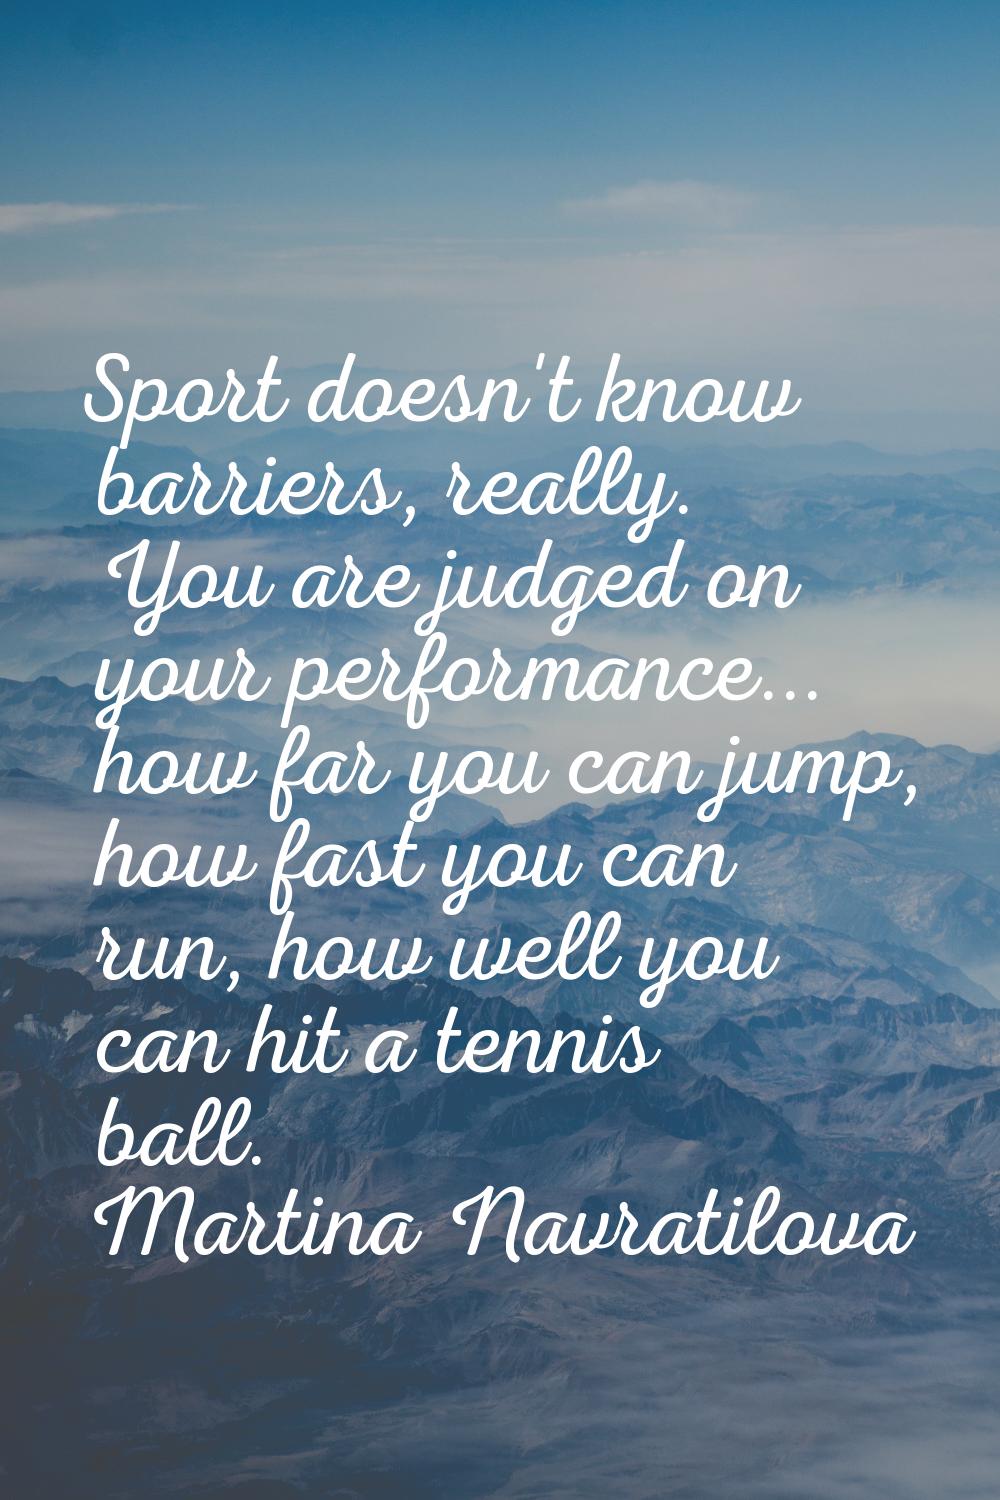 Sport doesn't know barriers, really. You are judged on your performance... how far you can jump, ho